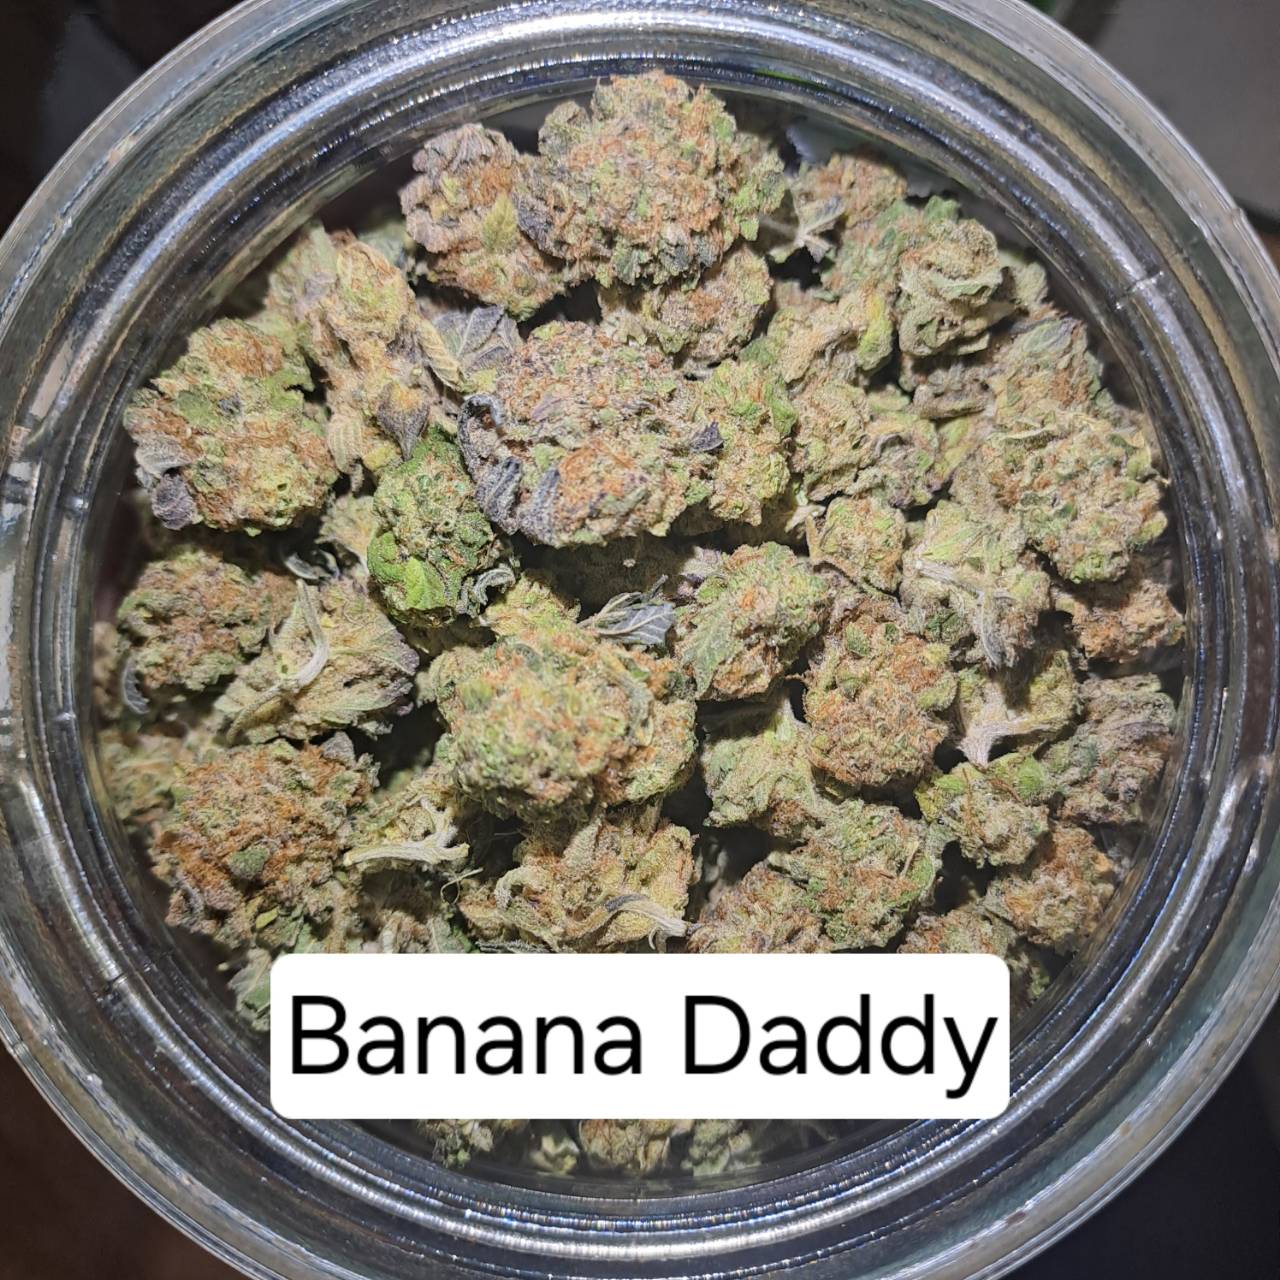 Product Image for Banana Daddy